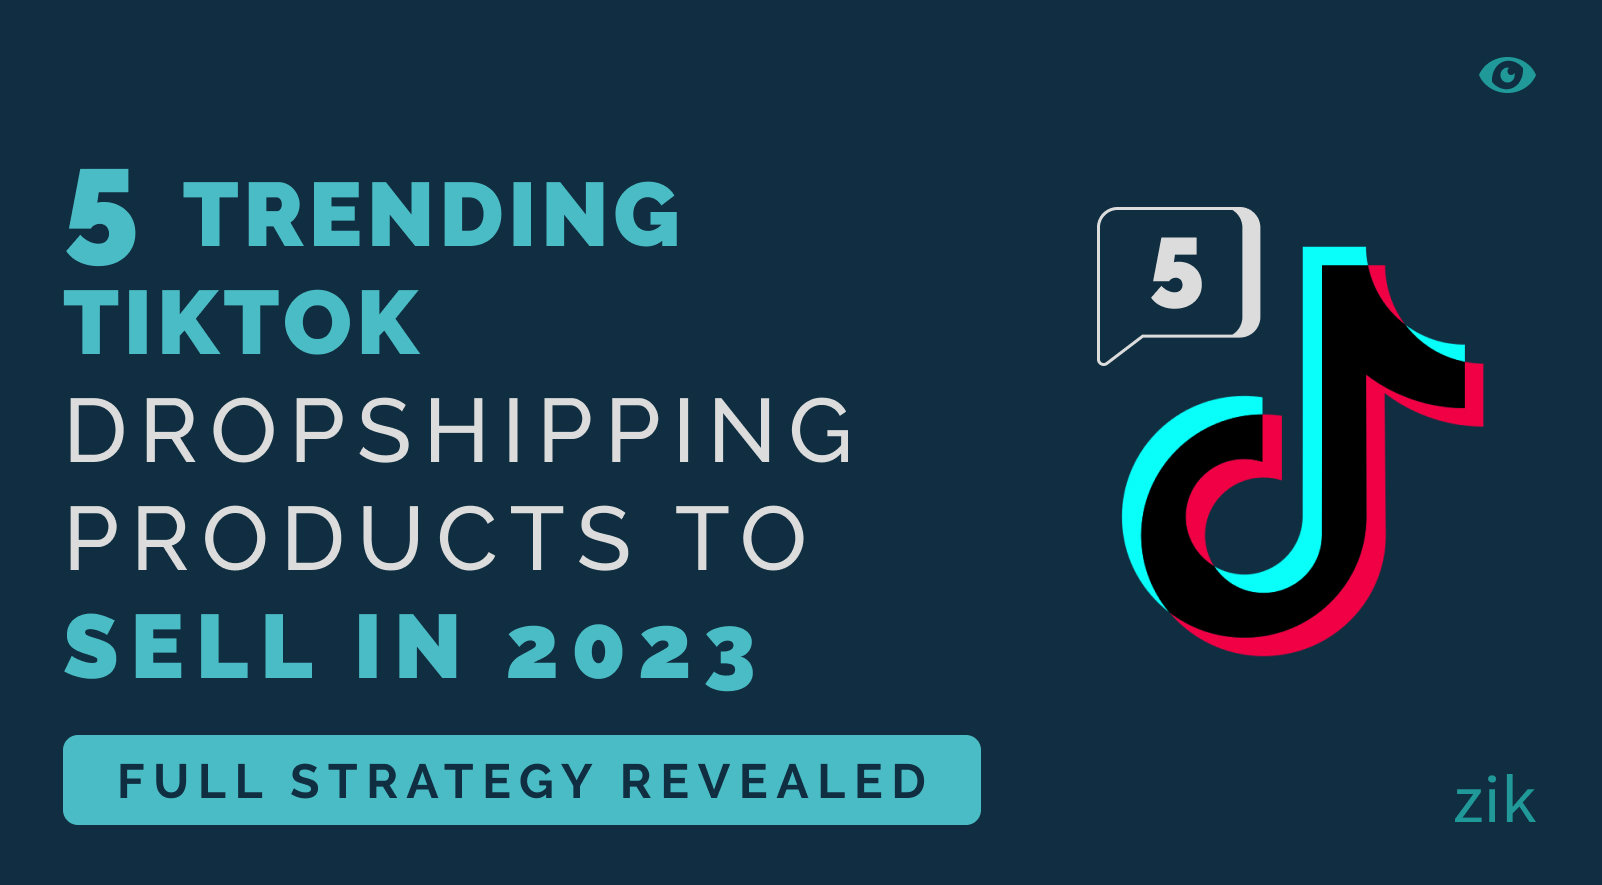 https://www.zikanalytics.com/blog/wp-content/uploads/2023/03/5-trending-tiktok-dropshipping-products-to-sell-in-2023-full-strategy-revealed.jpg